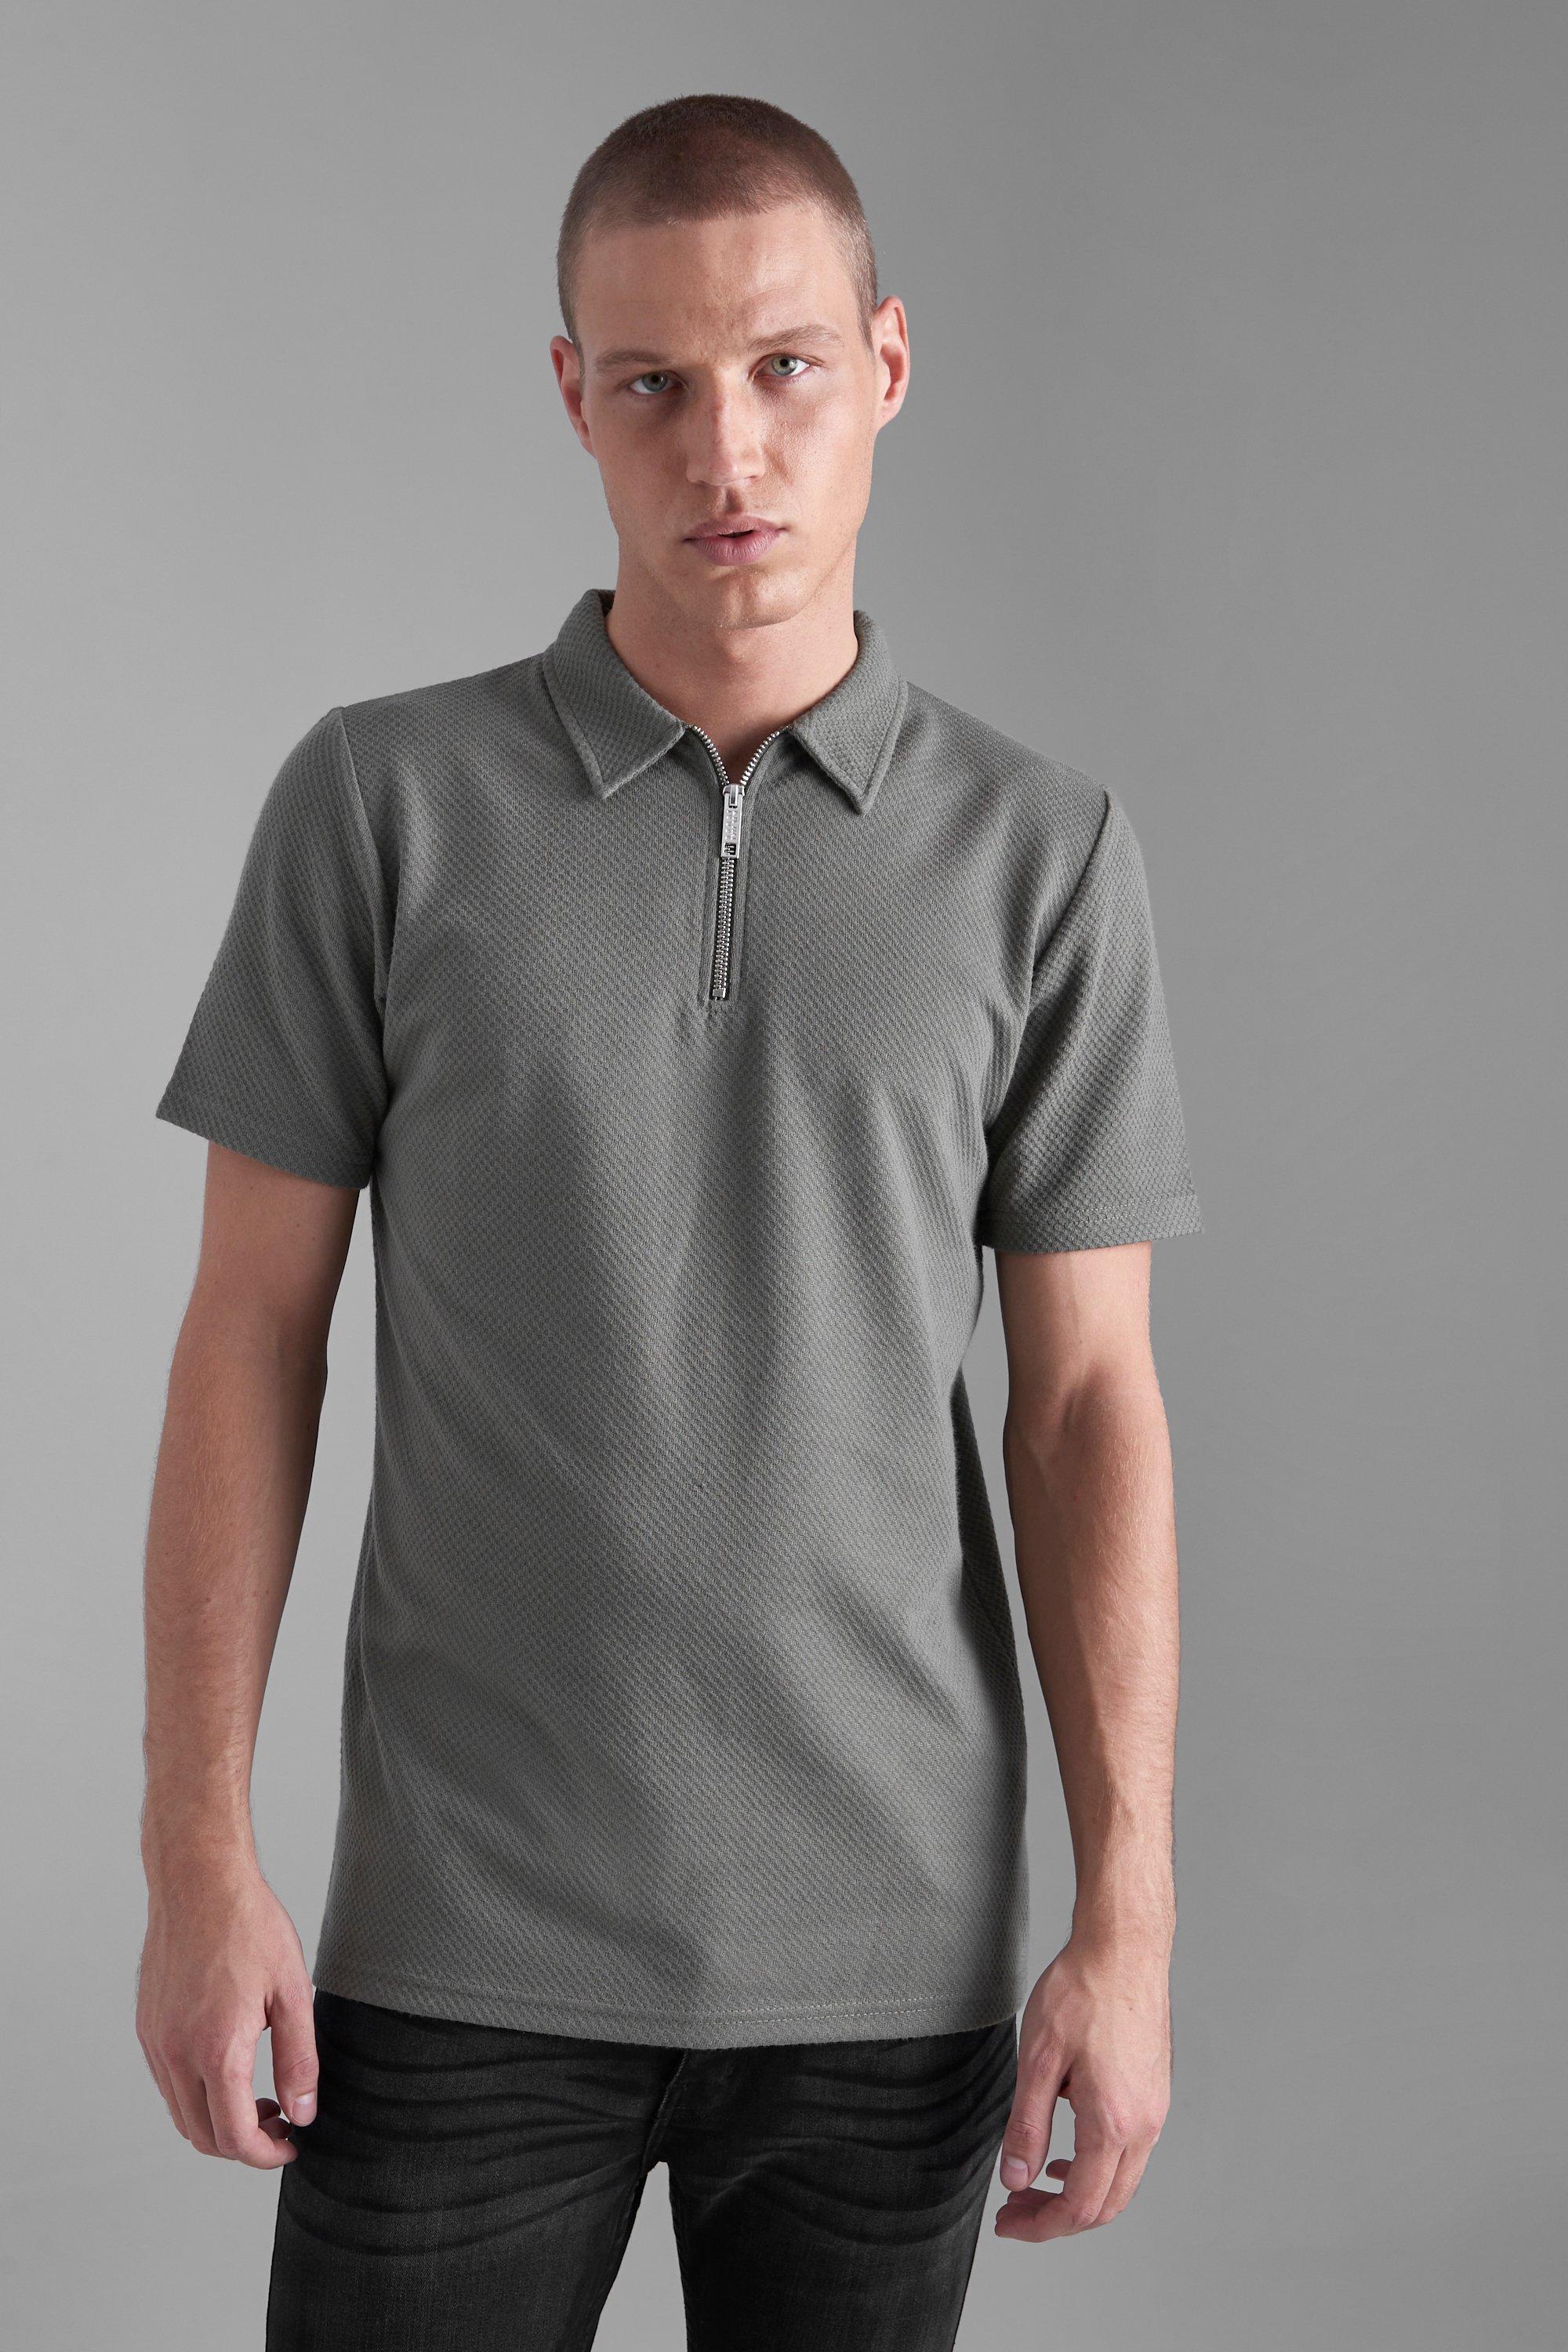 Jacquard Slim Fit Polo Met Hals Rits, Olive